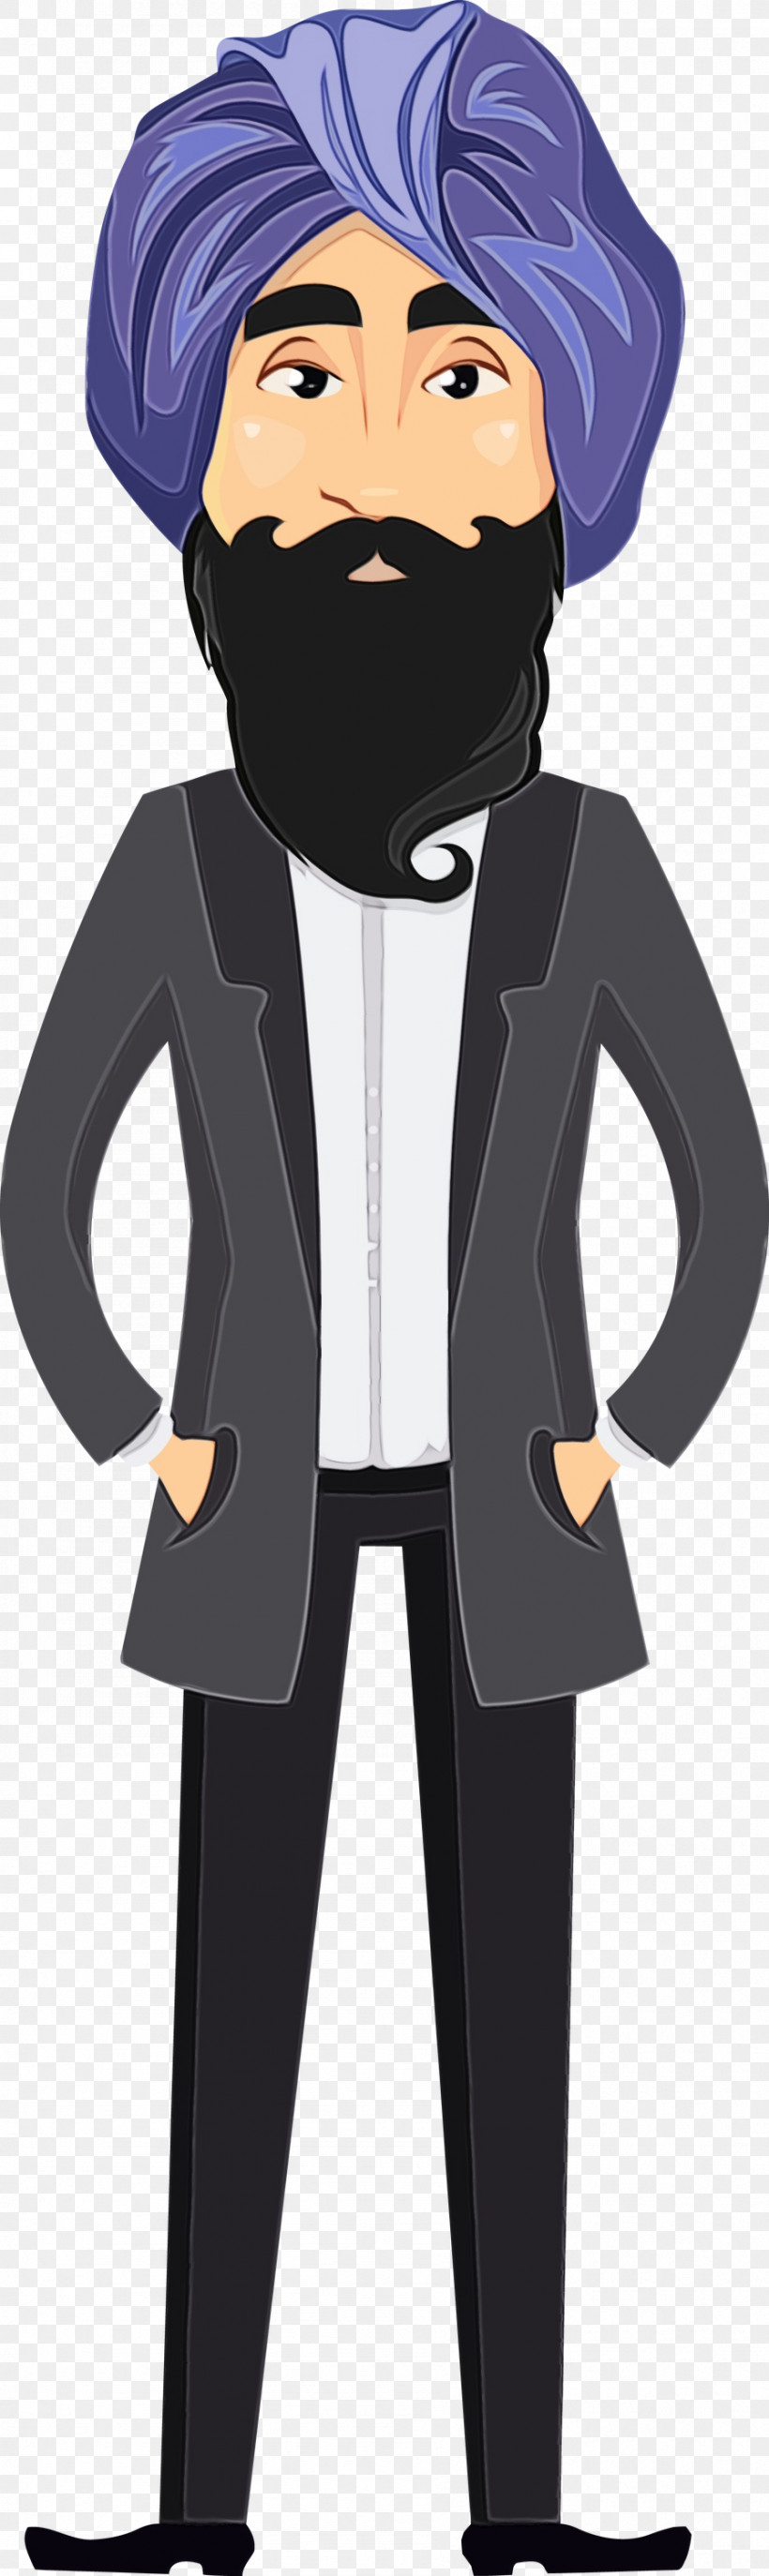 Clothing Outerwear Suit Jacket Cartoon, PNG, 895x3000px, India People, Blazer, Cartoon, Clothing, Formal Wear Download Free